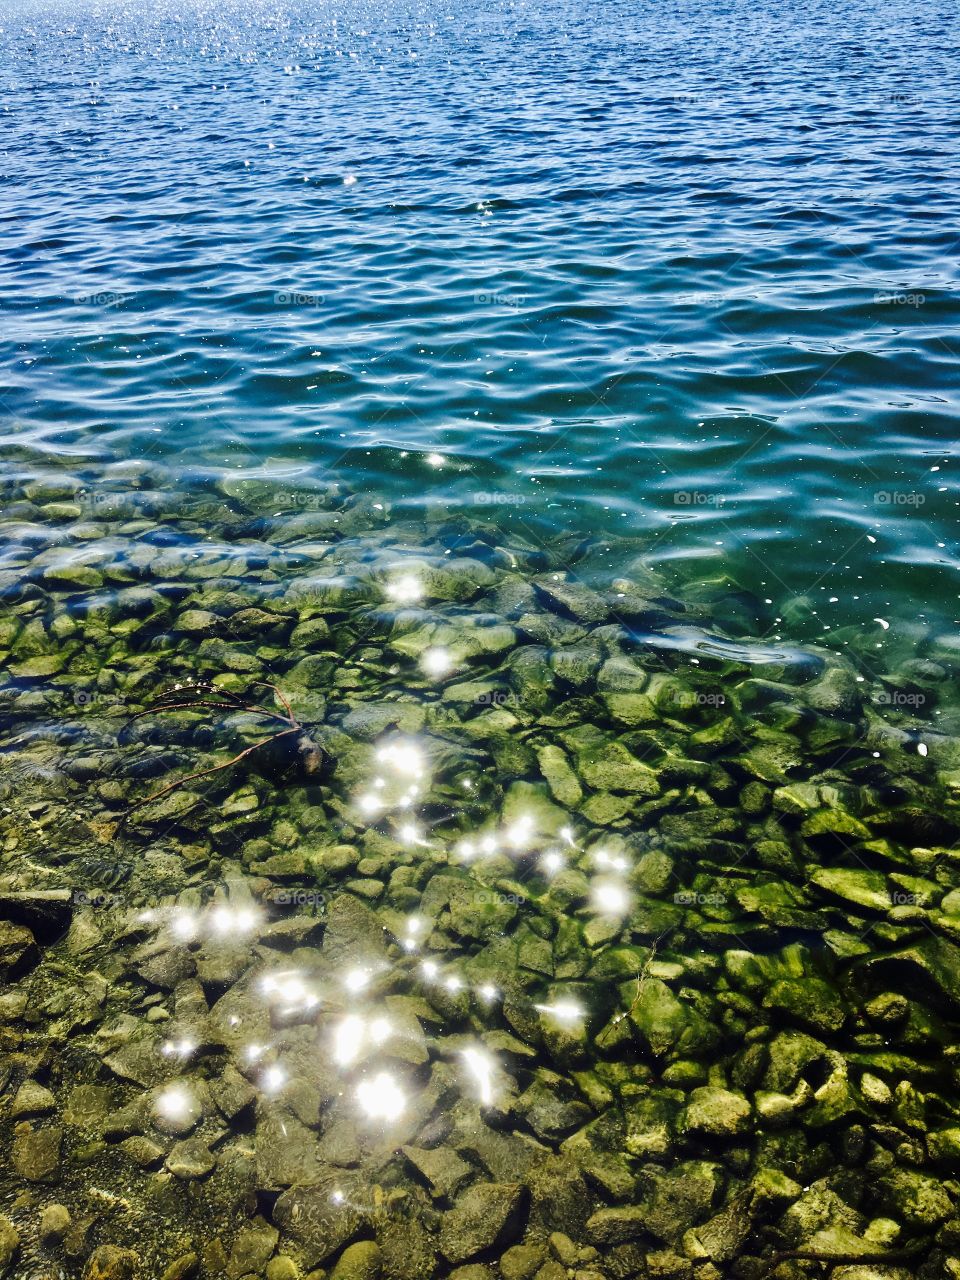 Sparkle in the water